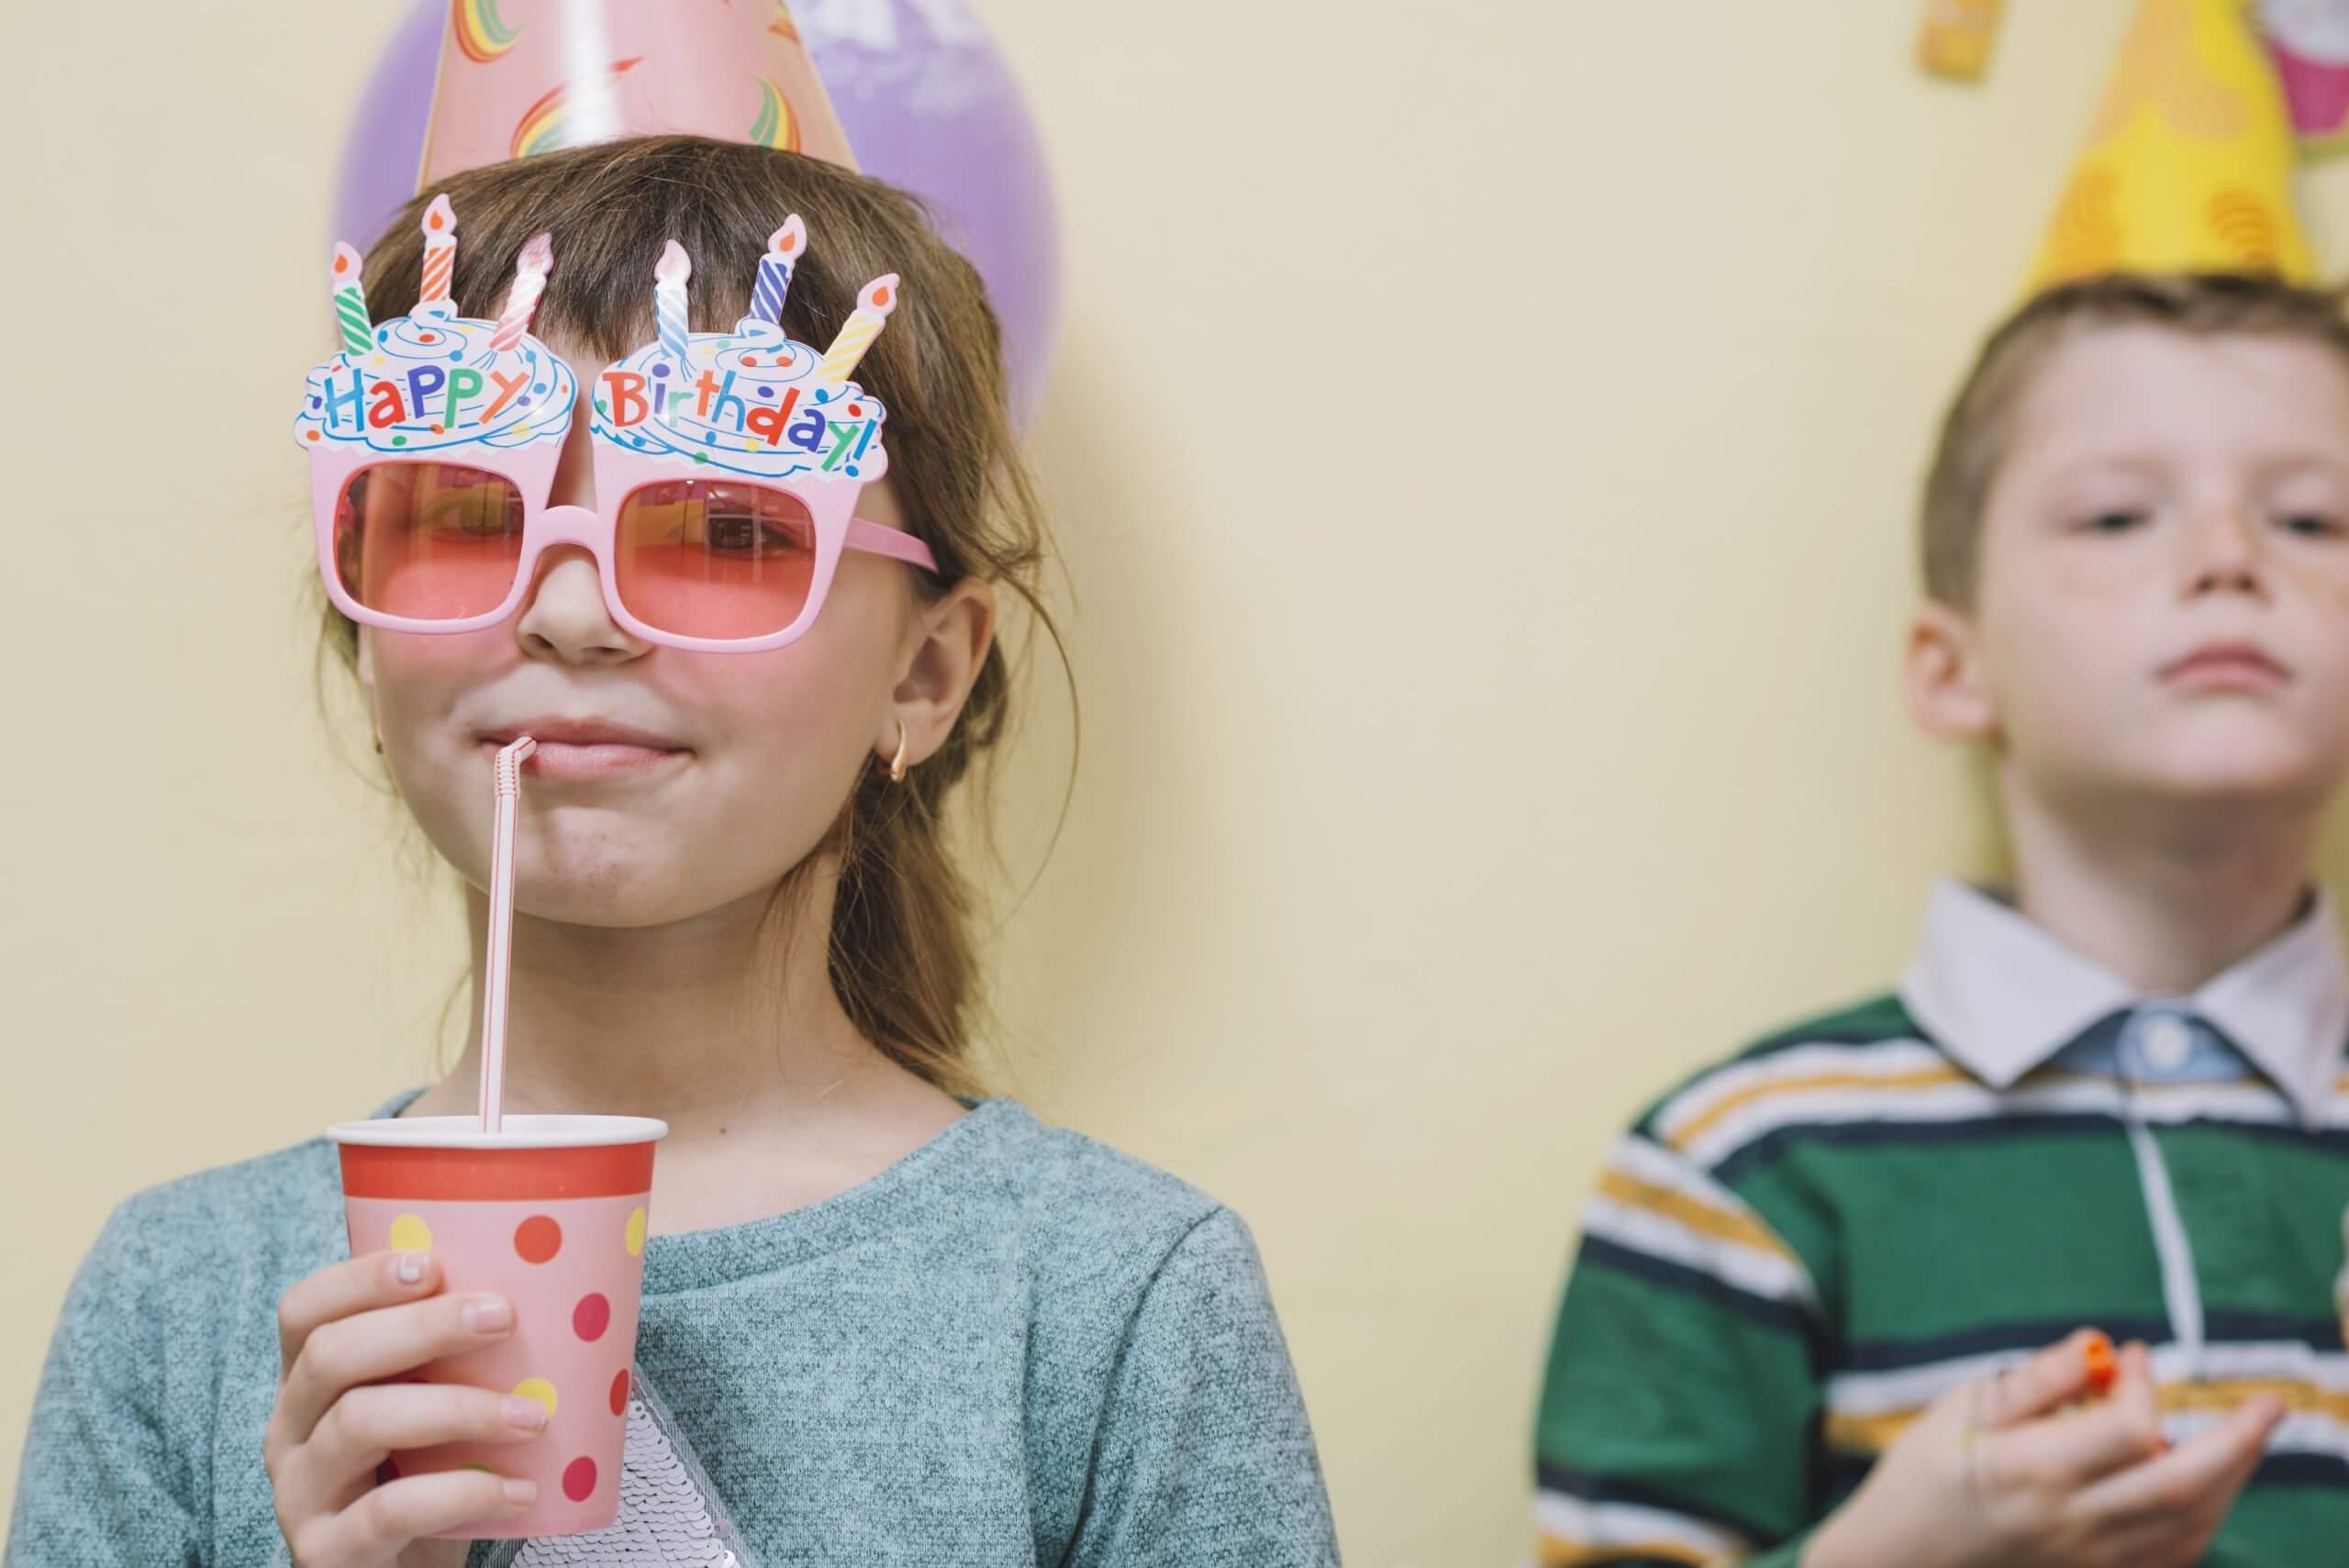 Birthday Party Planning Guide: How to Plan the Best and Most Stress-Free Birthday Party for Kids